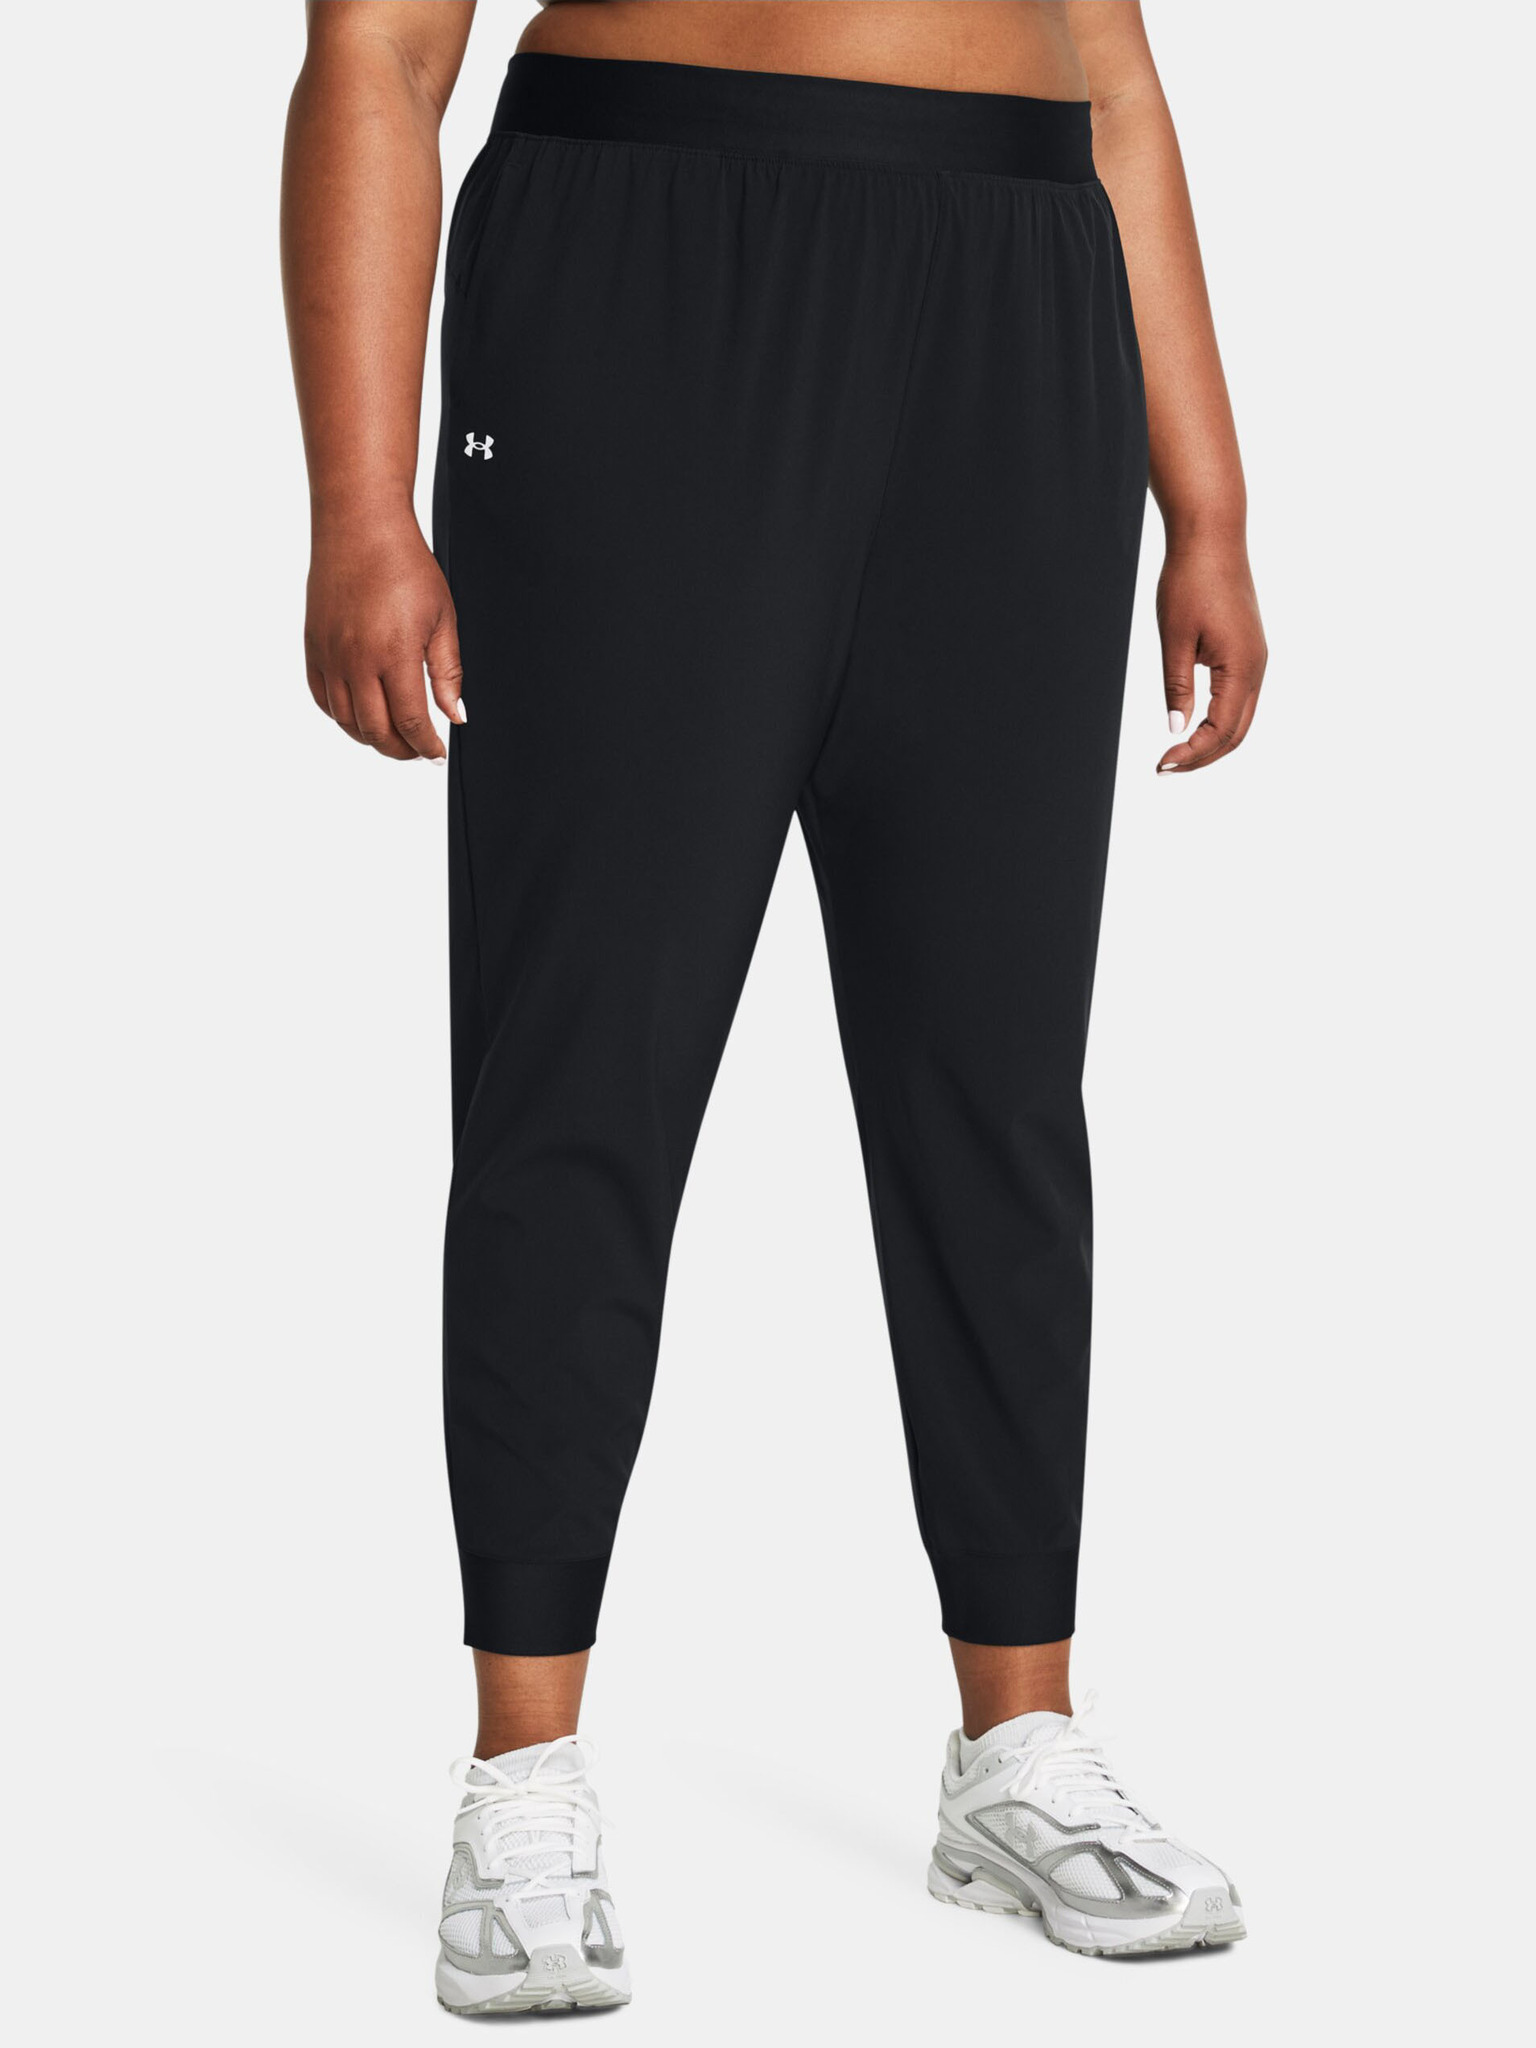 ArmourSport High Rise Wvn Kalhoty Under Armour